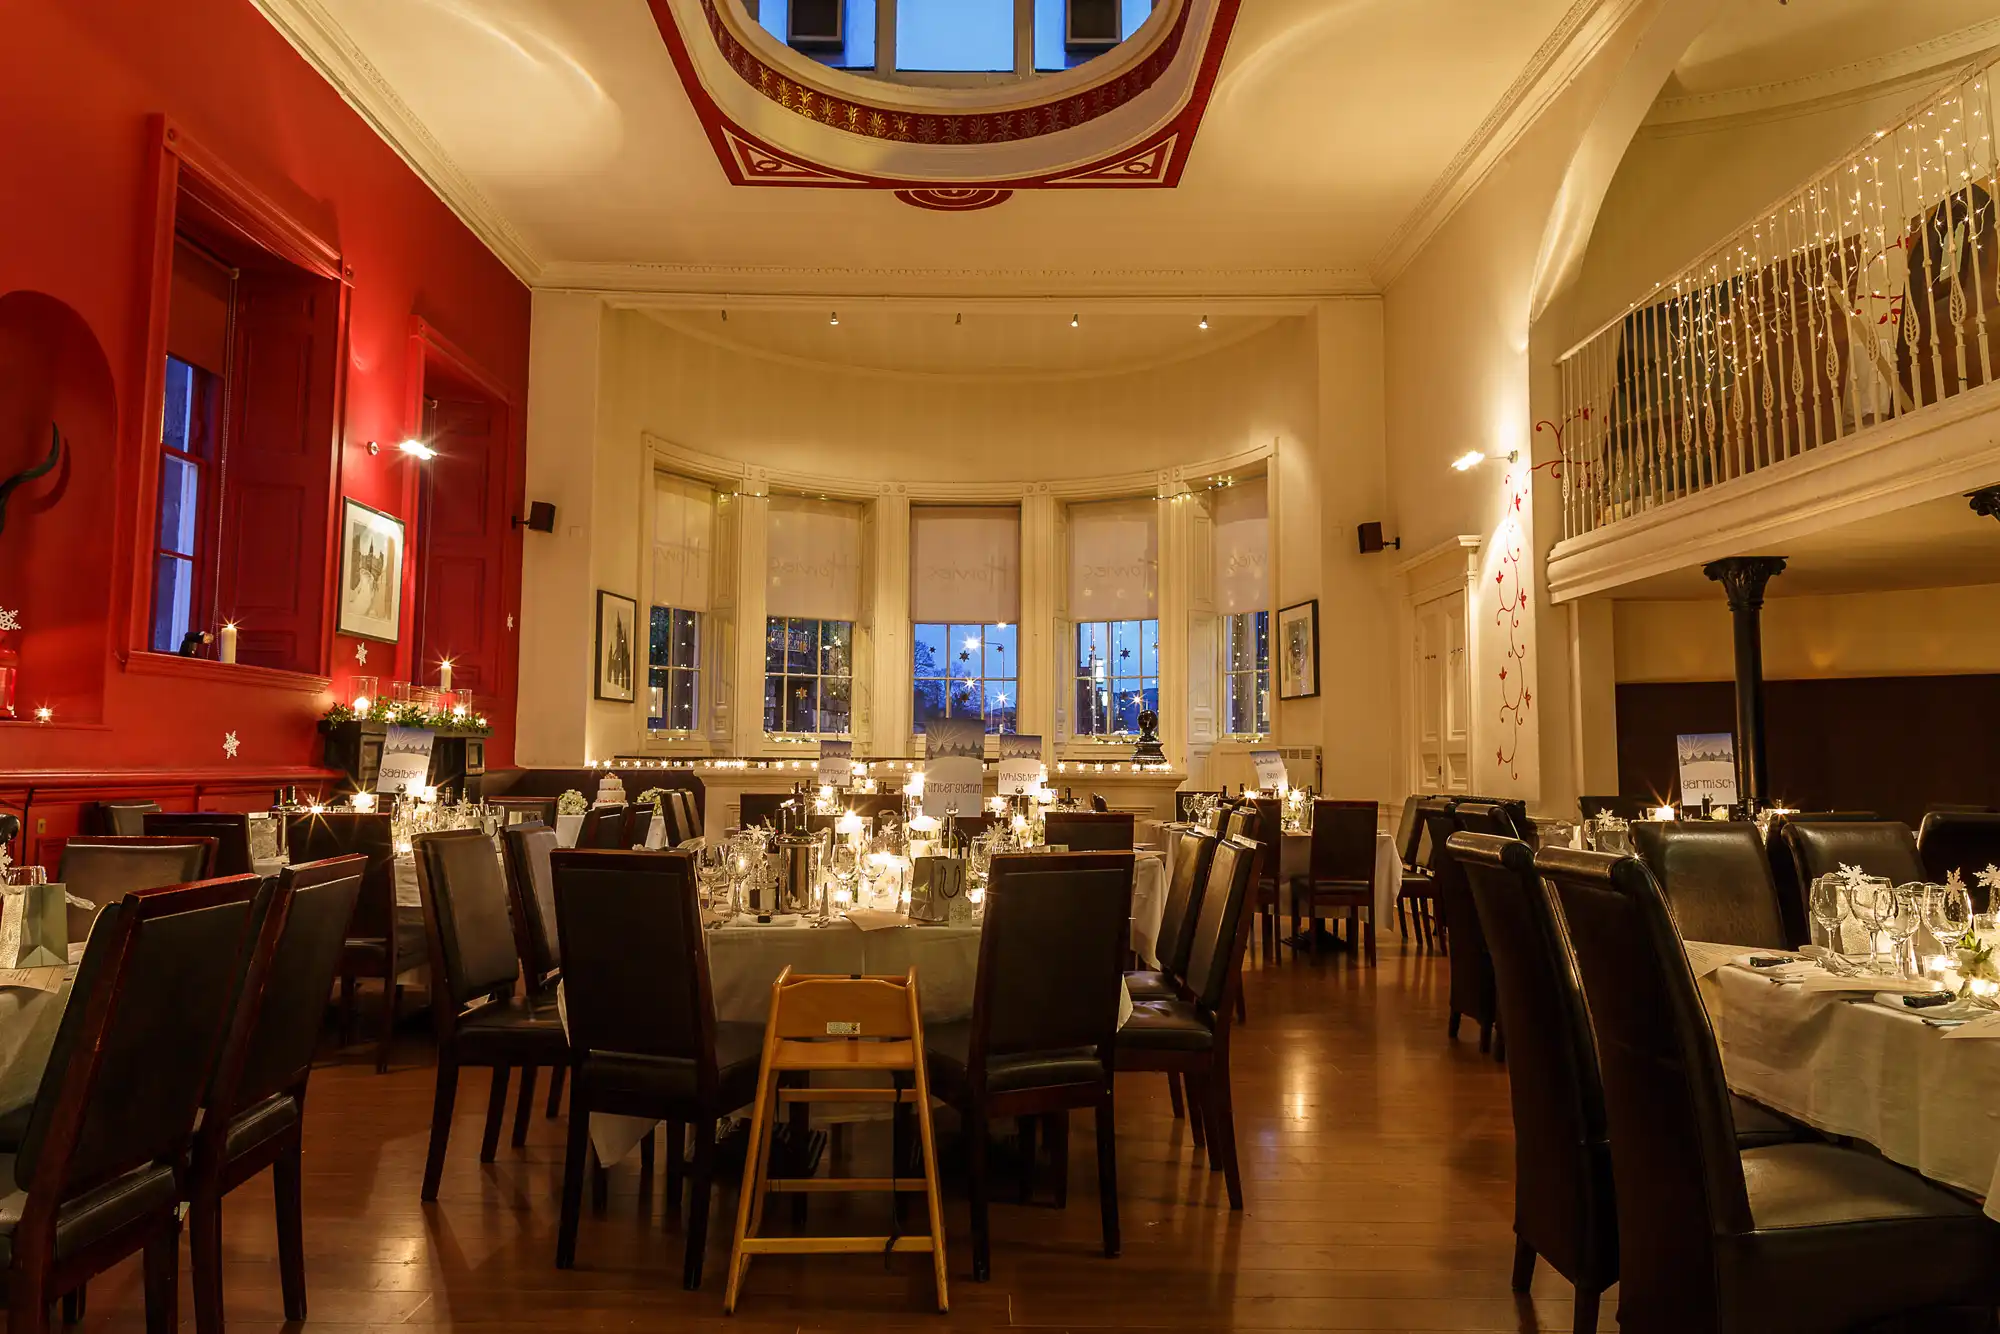 Elegant restaurant dining room with red walls, candlelit tables, large windows, and a balcony with decorative railing.